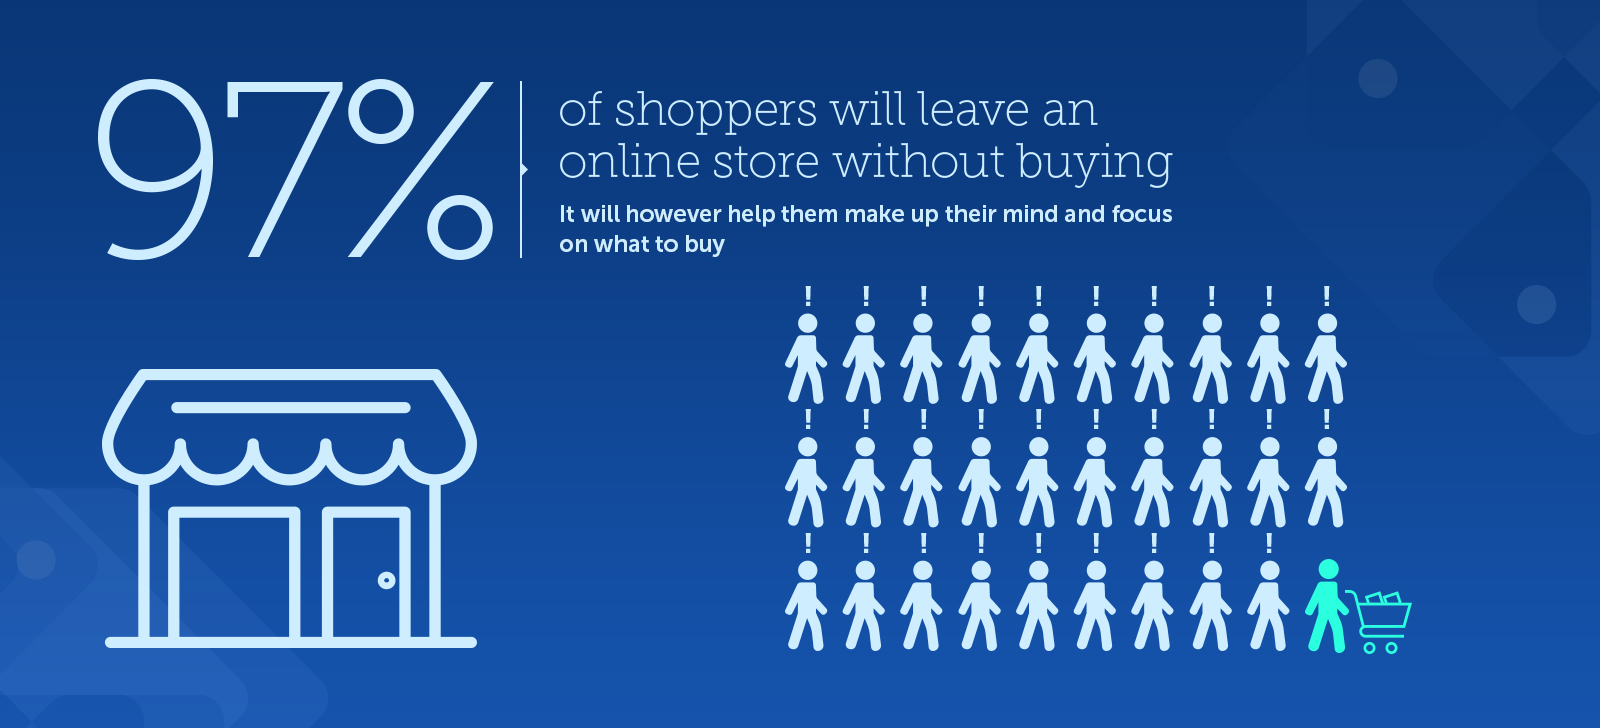 97% of shoppers will leave an online store without buying anything.